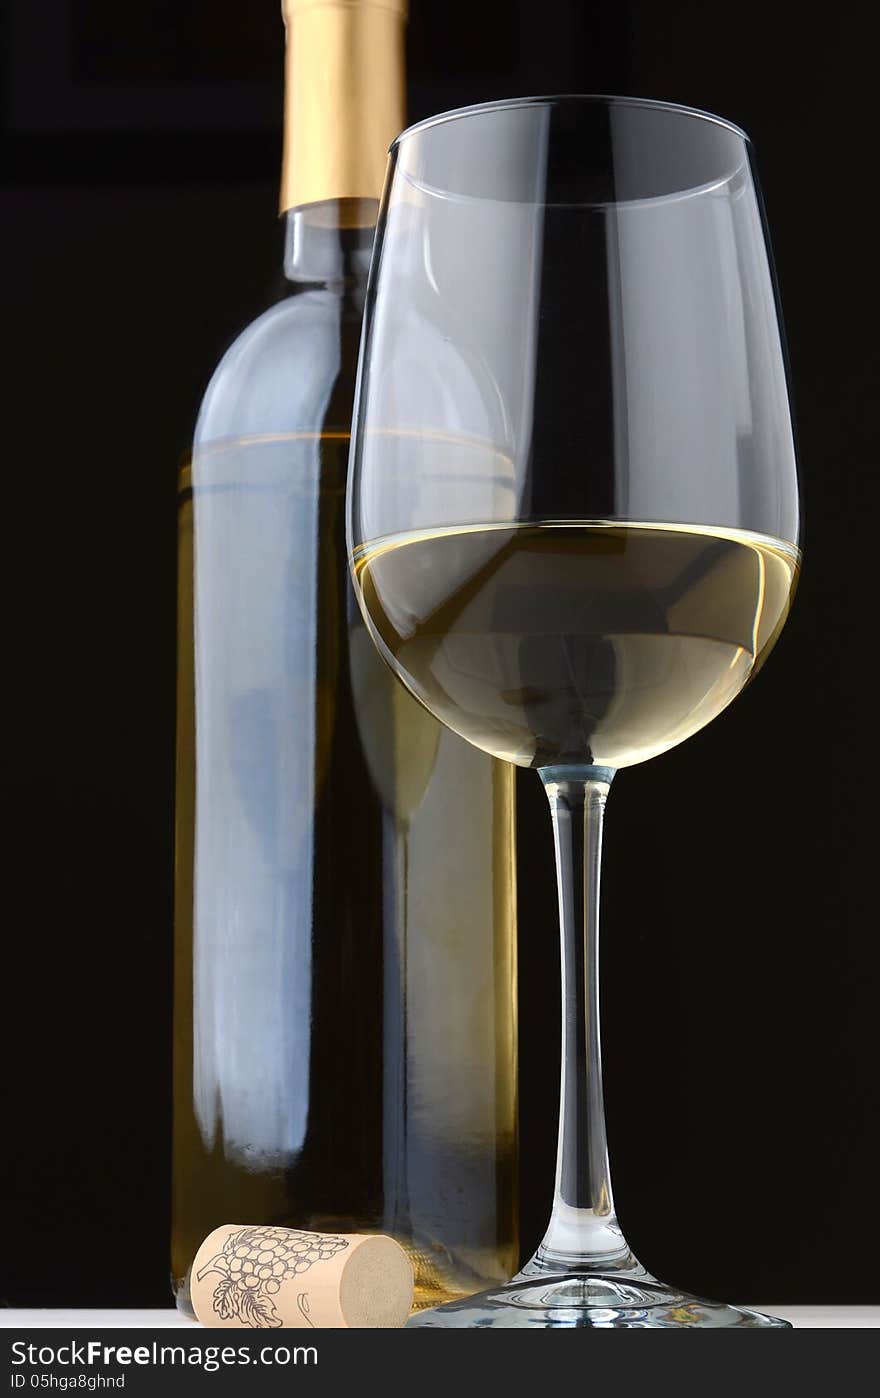 A glass of white wine with wine bottle and cork on a black background. A glass of white wine with wine bottle and cork on a black background.